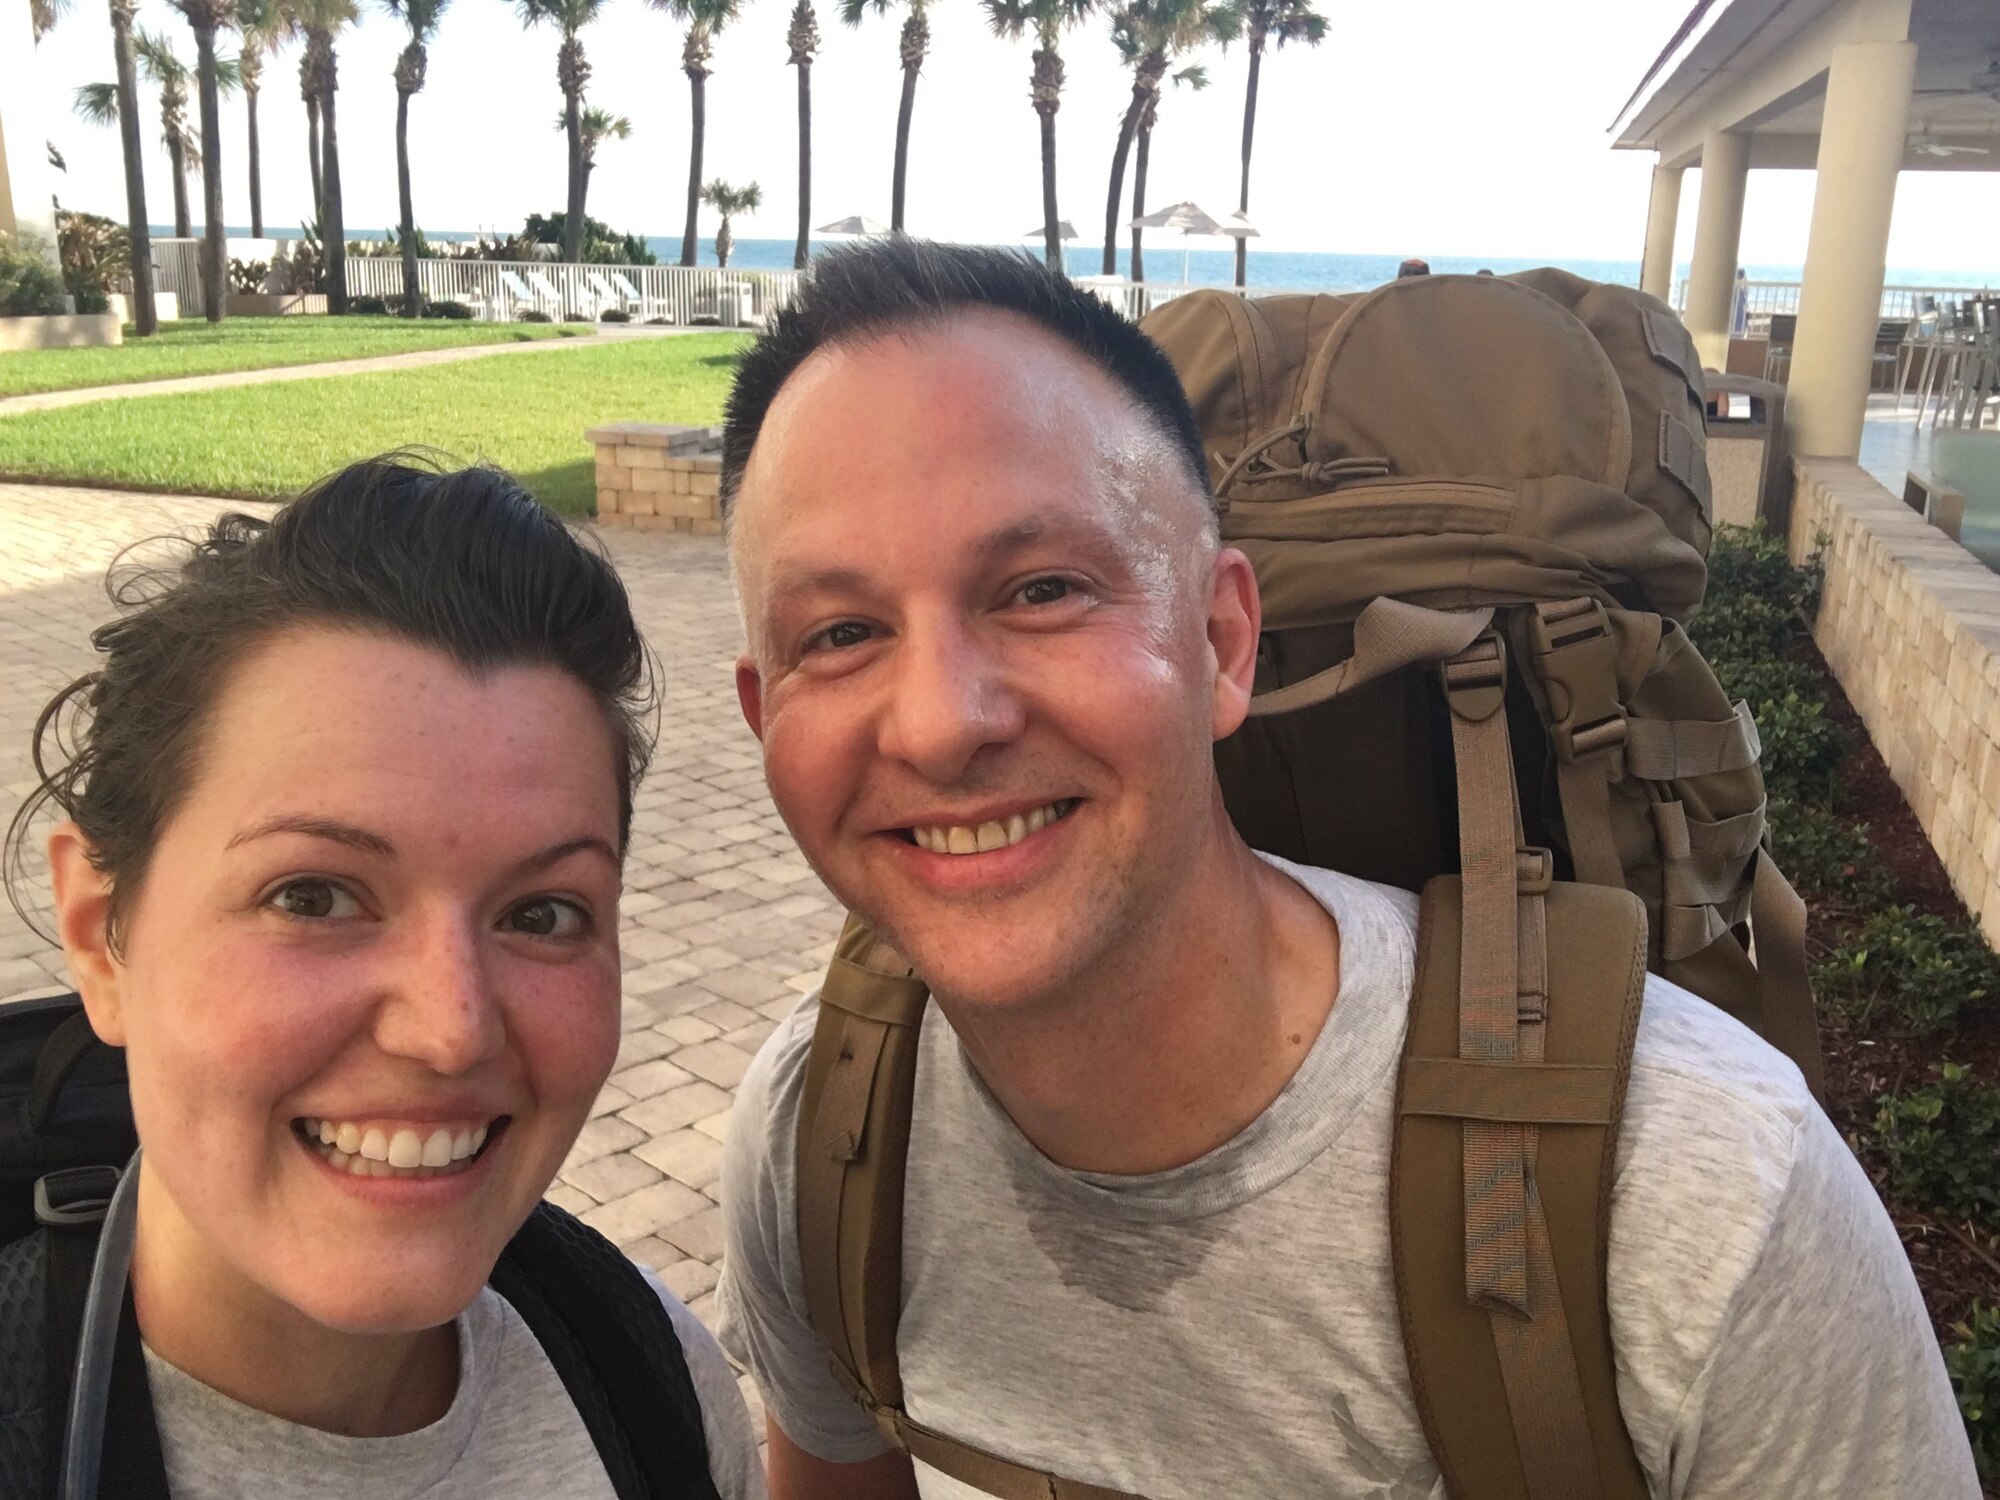 TSgt Jilian McGreen and SMSgt Bradley Bennett training in PT uniforms while on TDY in Florida in October 2019.